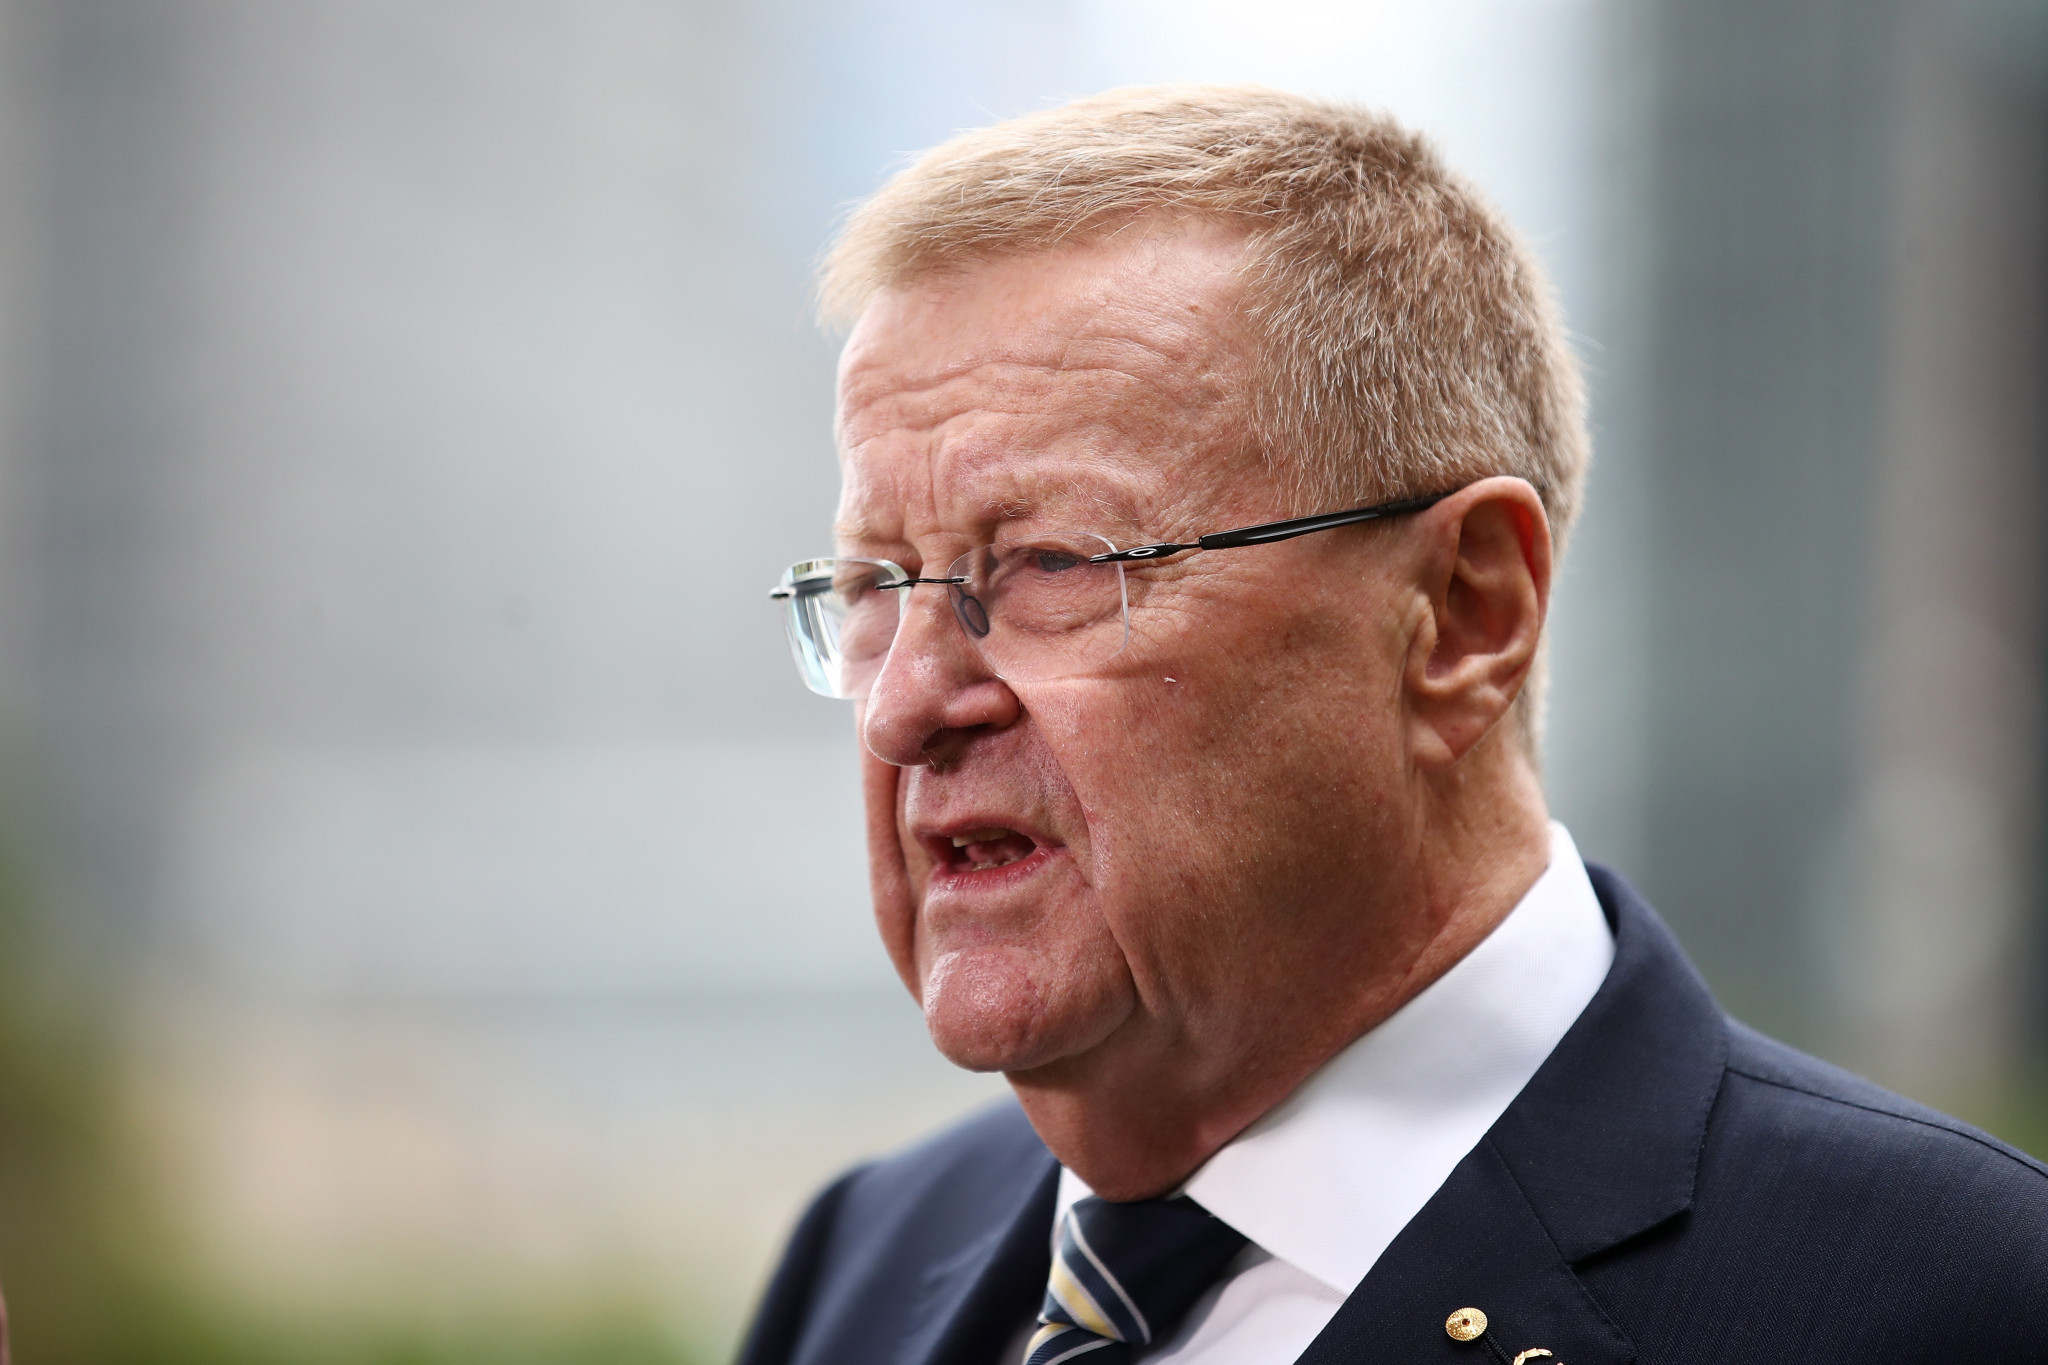 John Coates has said organisers are seeking to reduce the complexity of Tokyo 2020 ©Getty Images